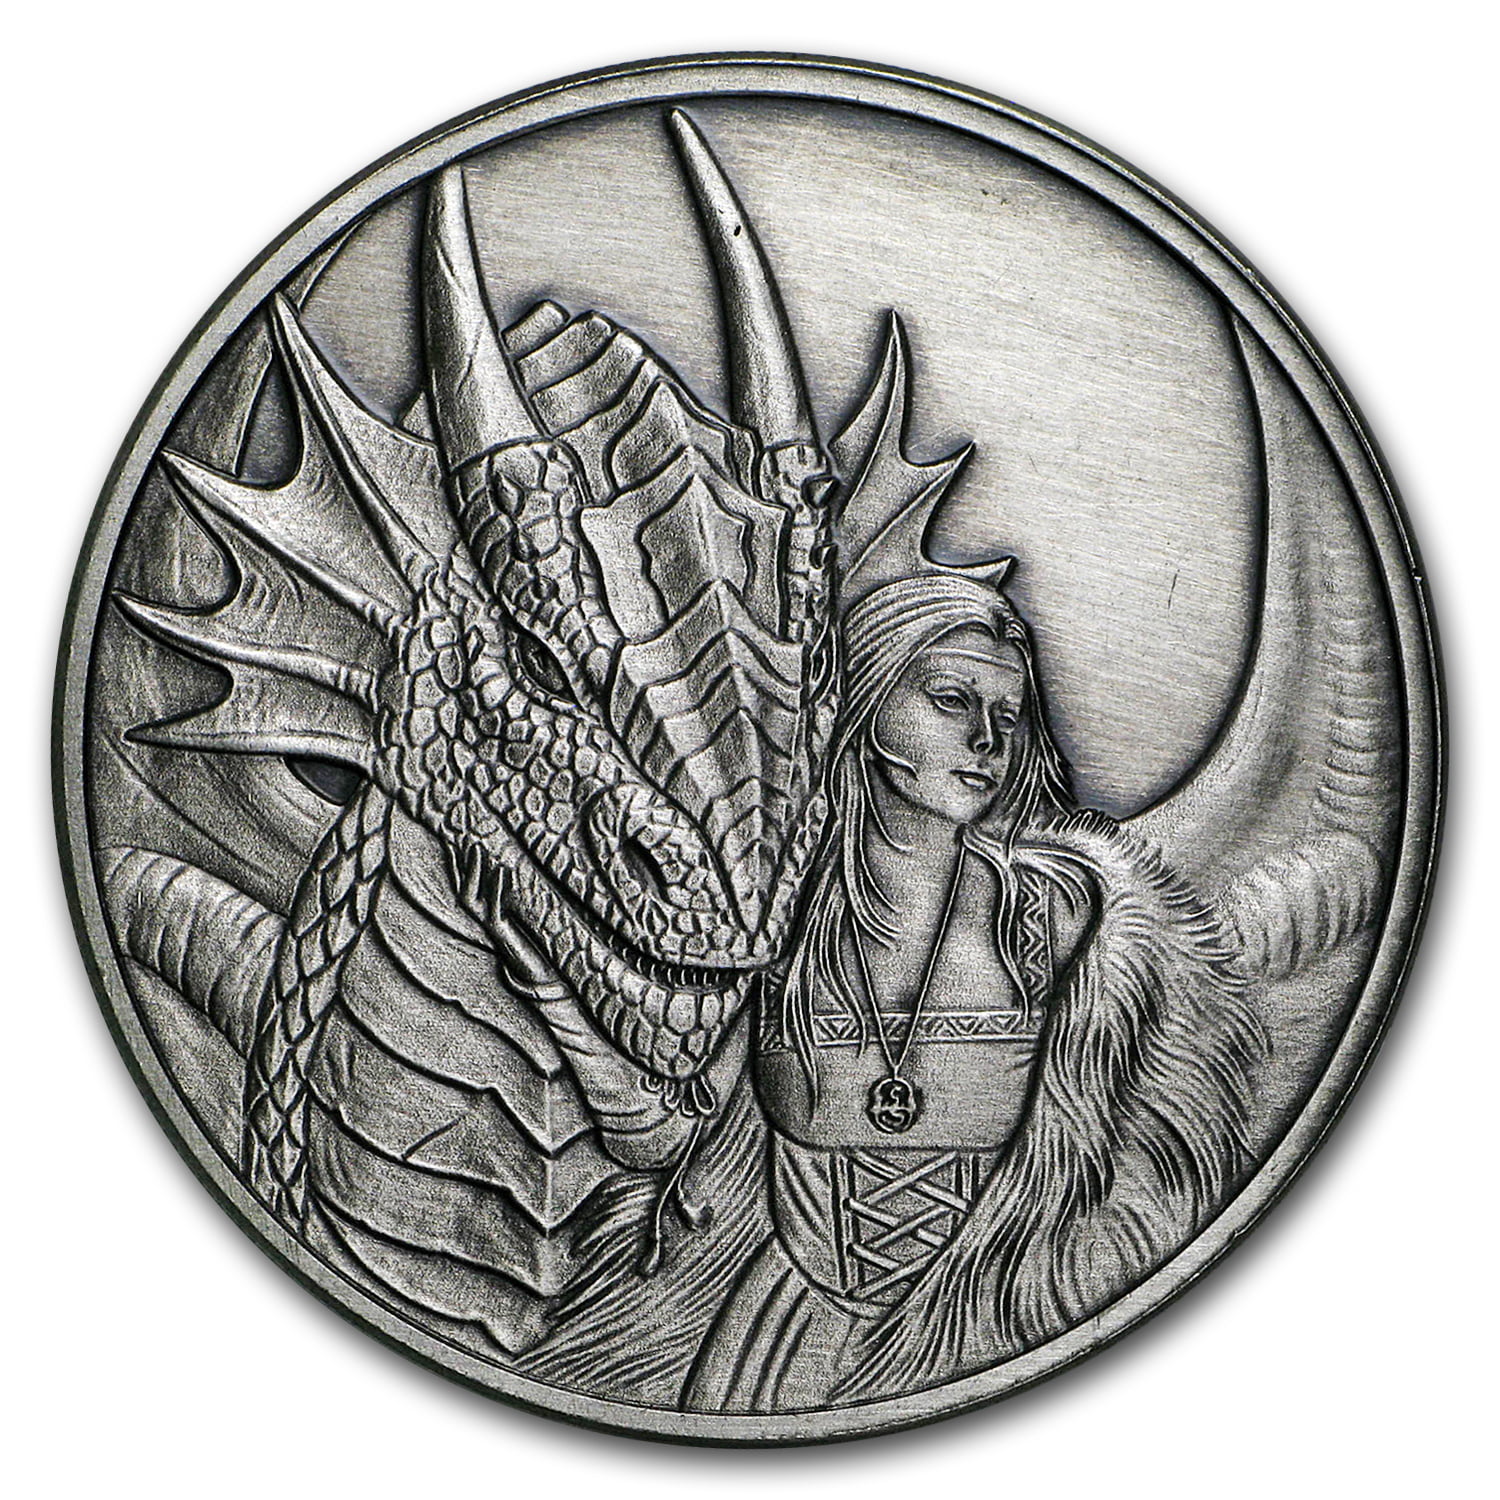 1 OZ 999 PURE SILVER PROOF WATER DRAGON ANNE STOKES ROUND COIN BULLION ANTIQUED 